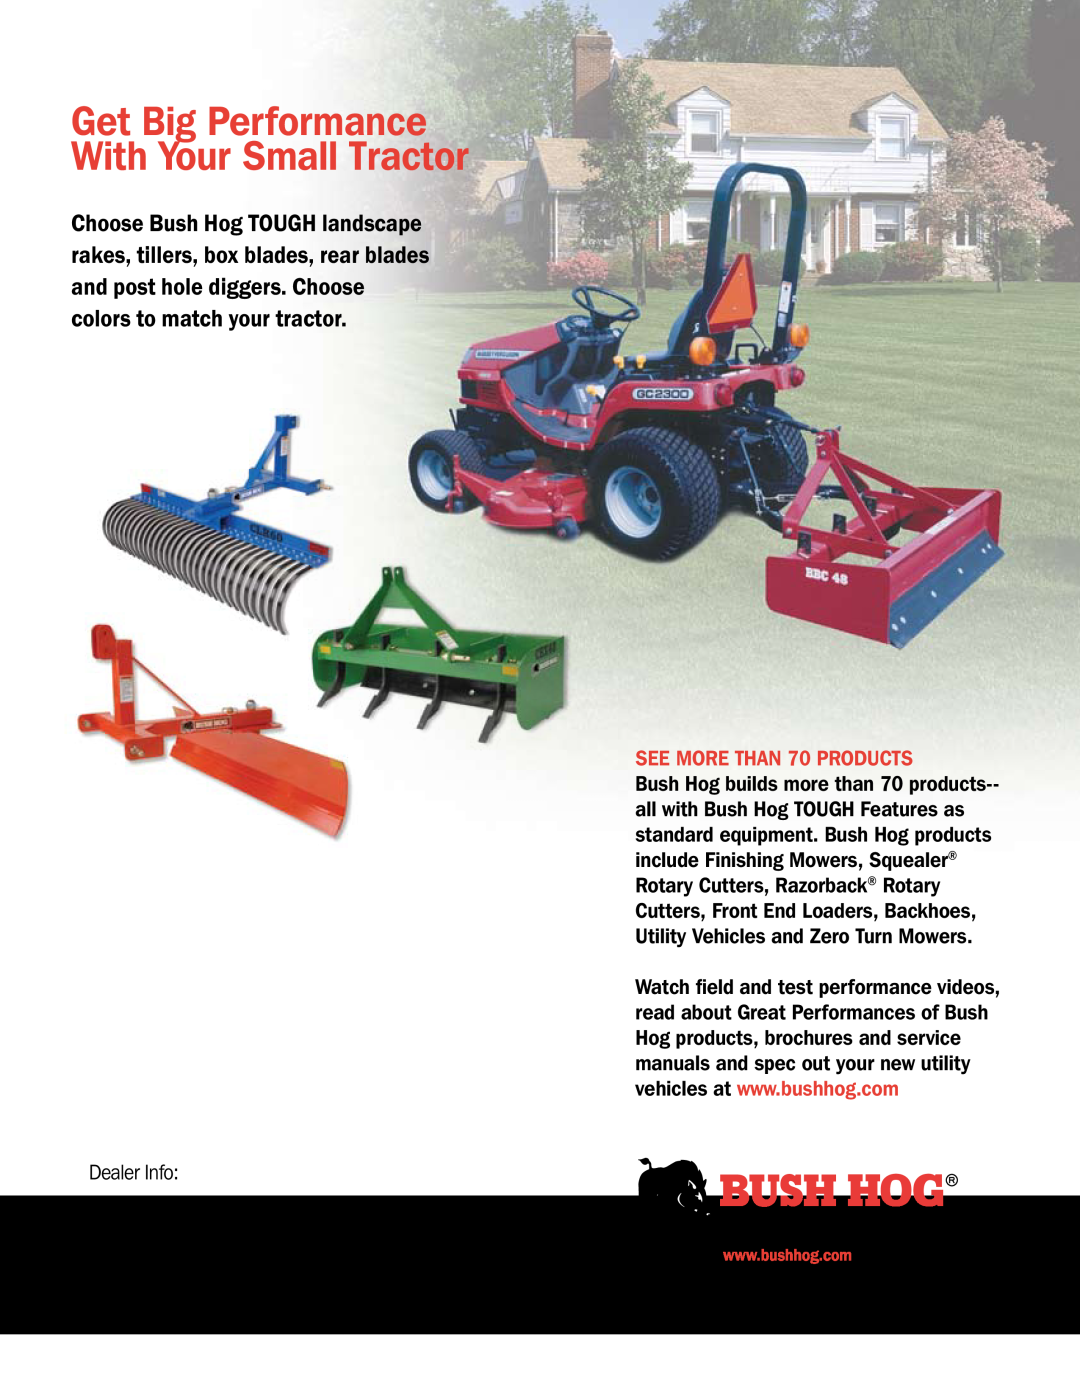 Bush Hog Subcompact Box Blades manual Get Big Performance With Your Small Tractor, SEE MORE THAN 70 PRODUCTS, Dealer Info 